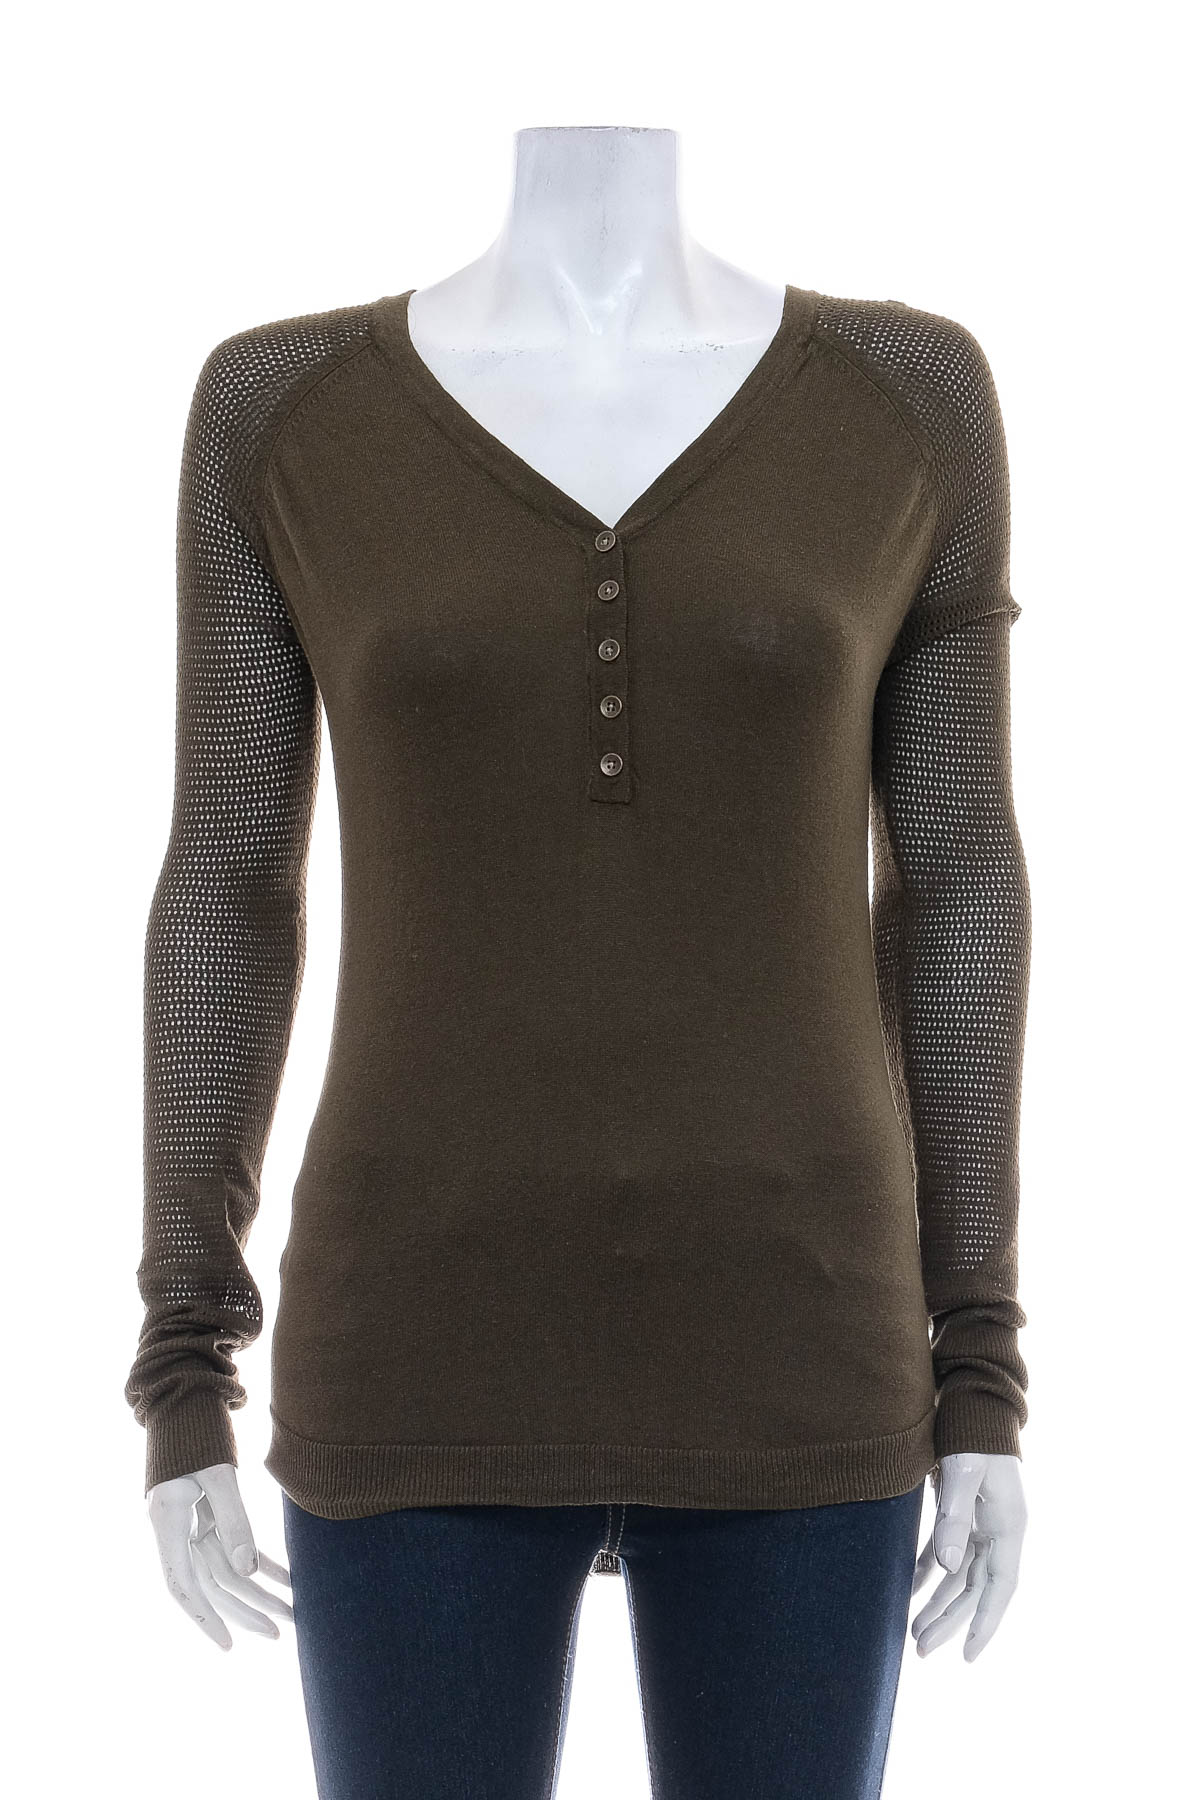 Women's sweater - Kaisely - 0